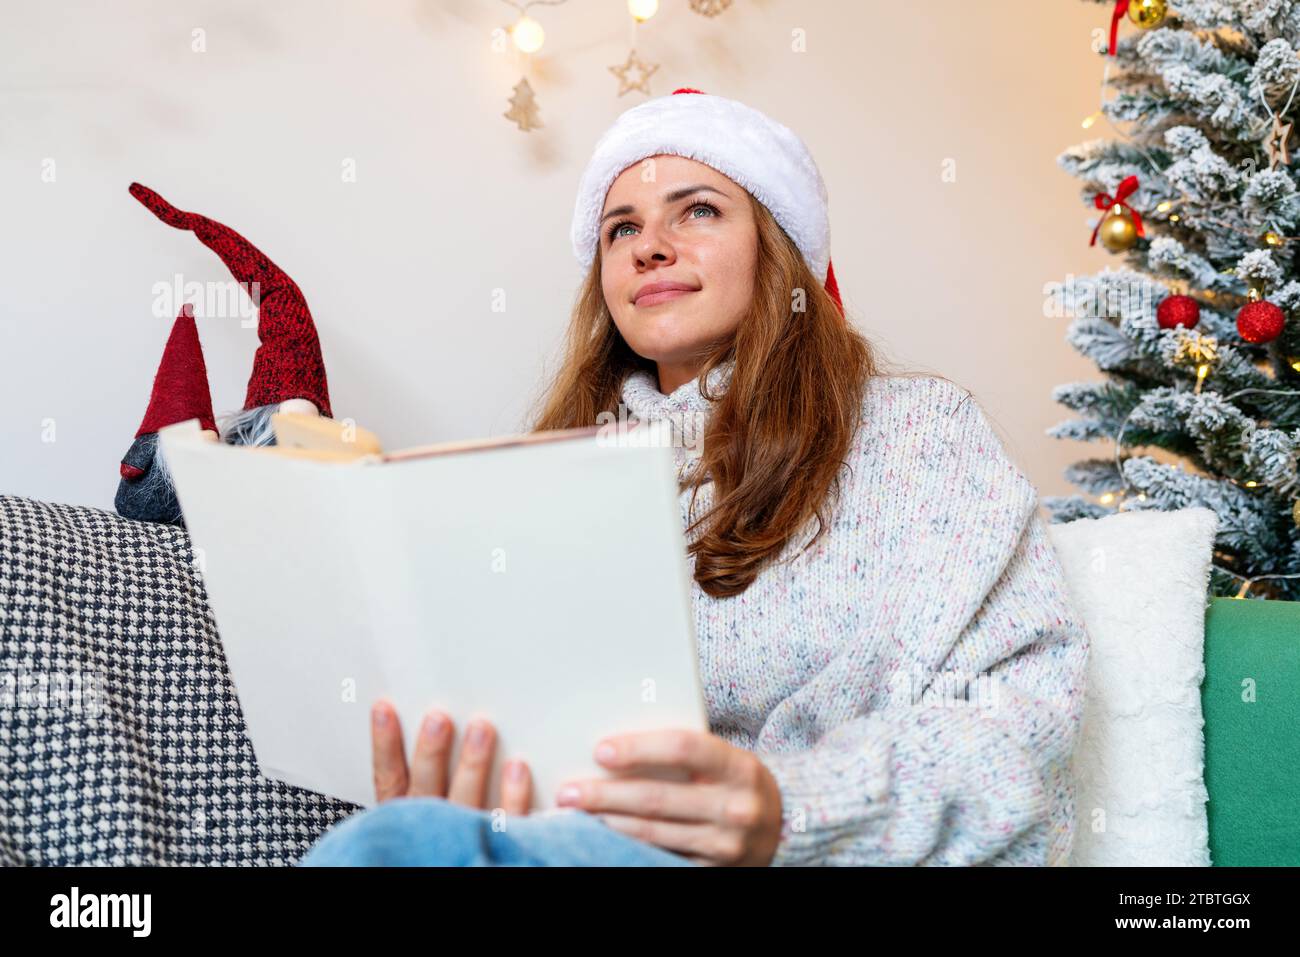 Adult woman in Santa hat reading fairy tale book, fantasies and dreams during Christmas holidays. Stock Photo